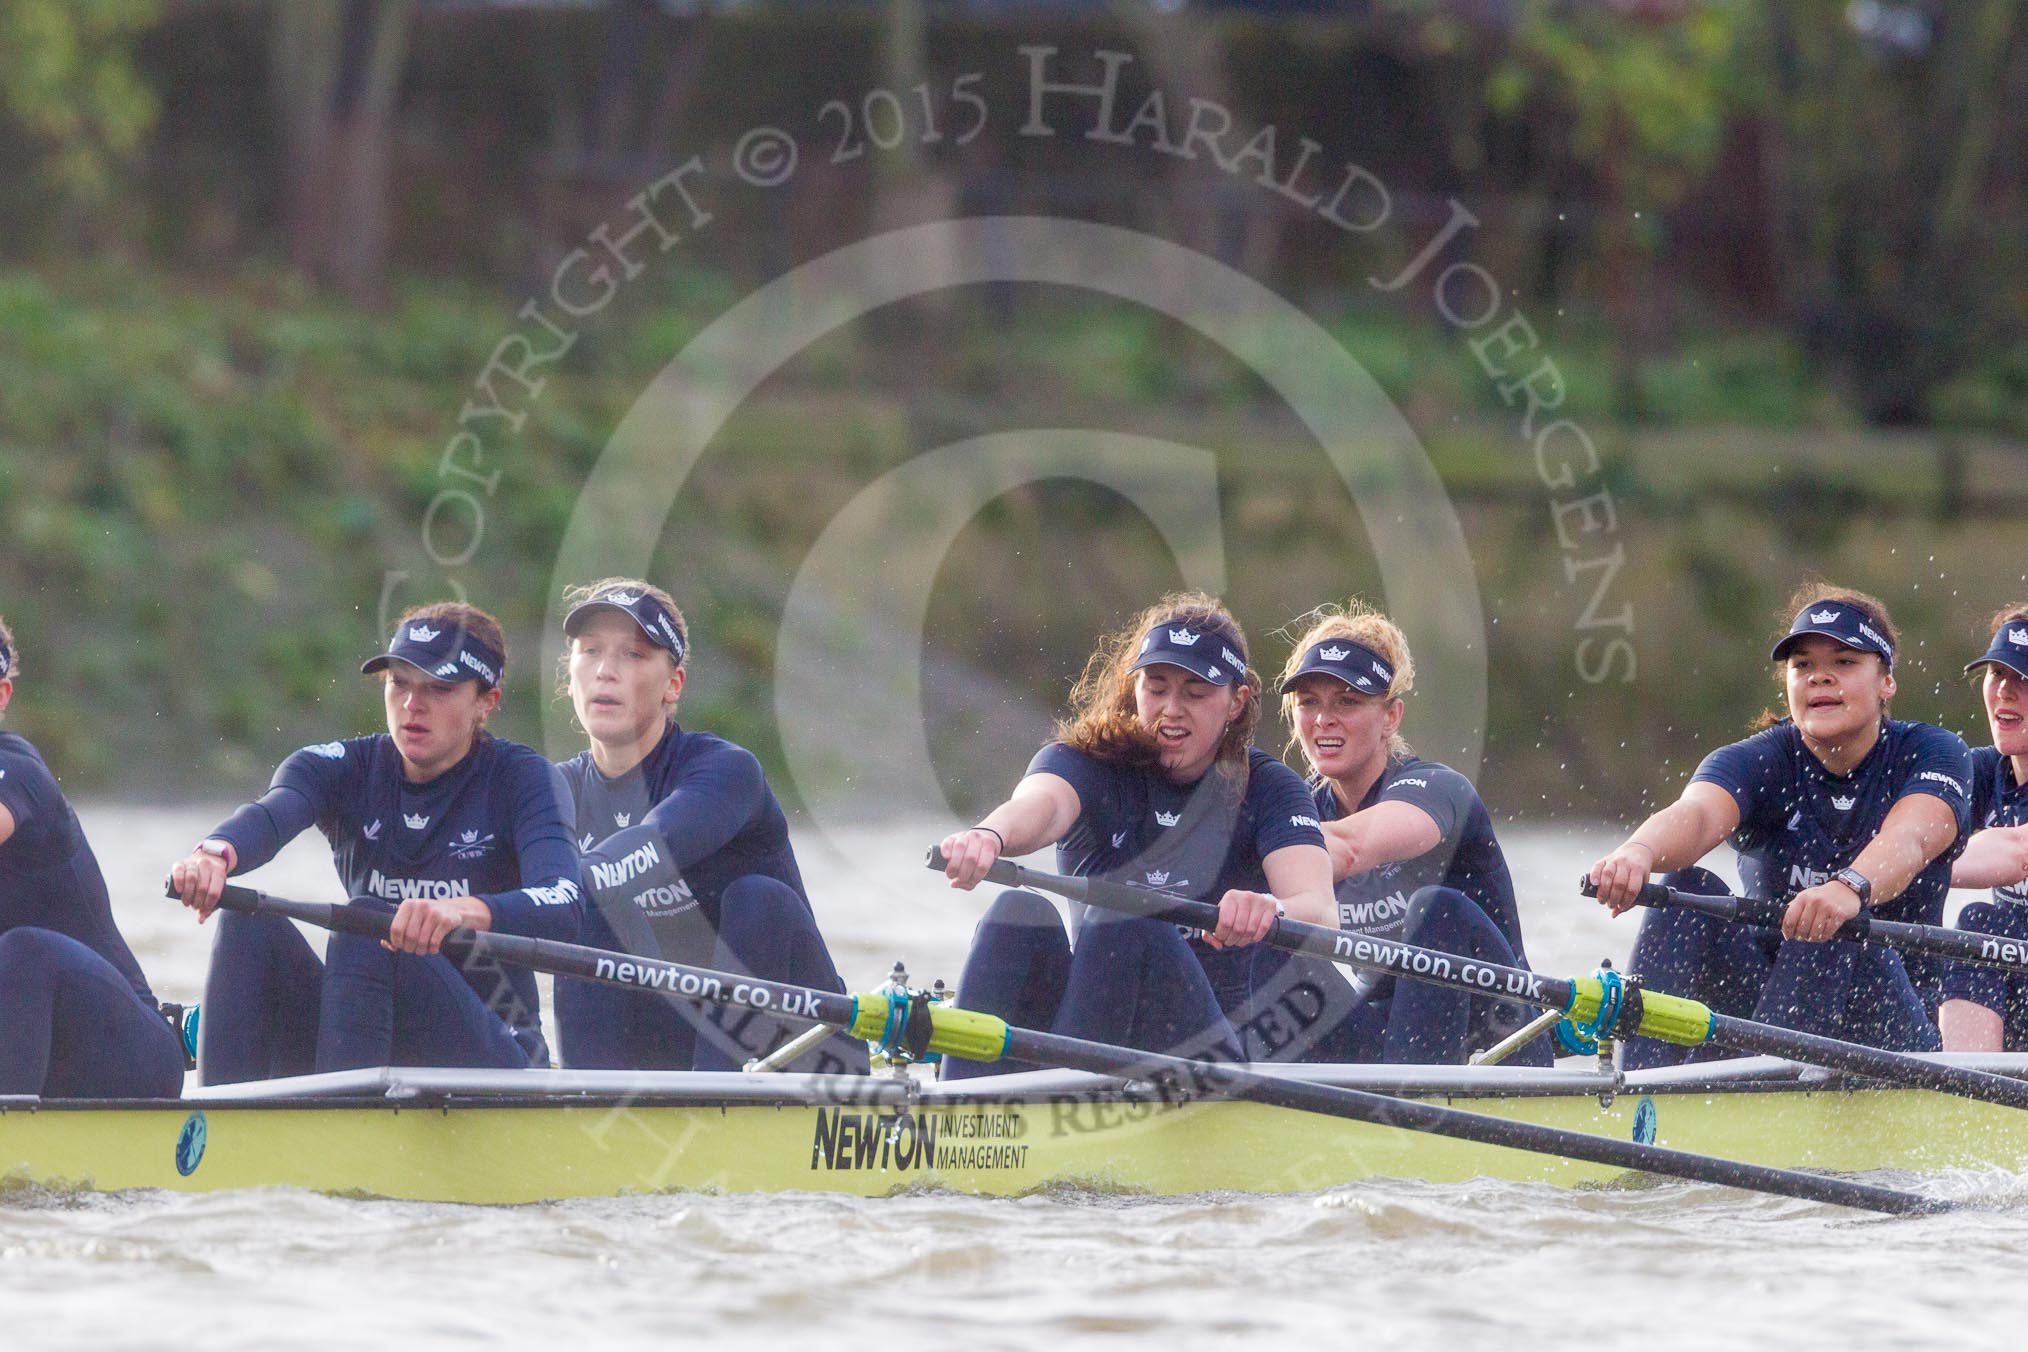 The Boat Race season 2016 - Women's Boat Race Trial Eights (OUWBC, Oxford): "Charybdis", here 7-Maddy Badcott, 6-Elo Luik, 5-Ruth Siddorn, 4-Emma Spruce, 3-Lara Pysden.
River Thames between Putney Bridge and Mortlake,
London SW15,

United Kingdom,
on 10 December 2015 at 12:35, image #299